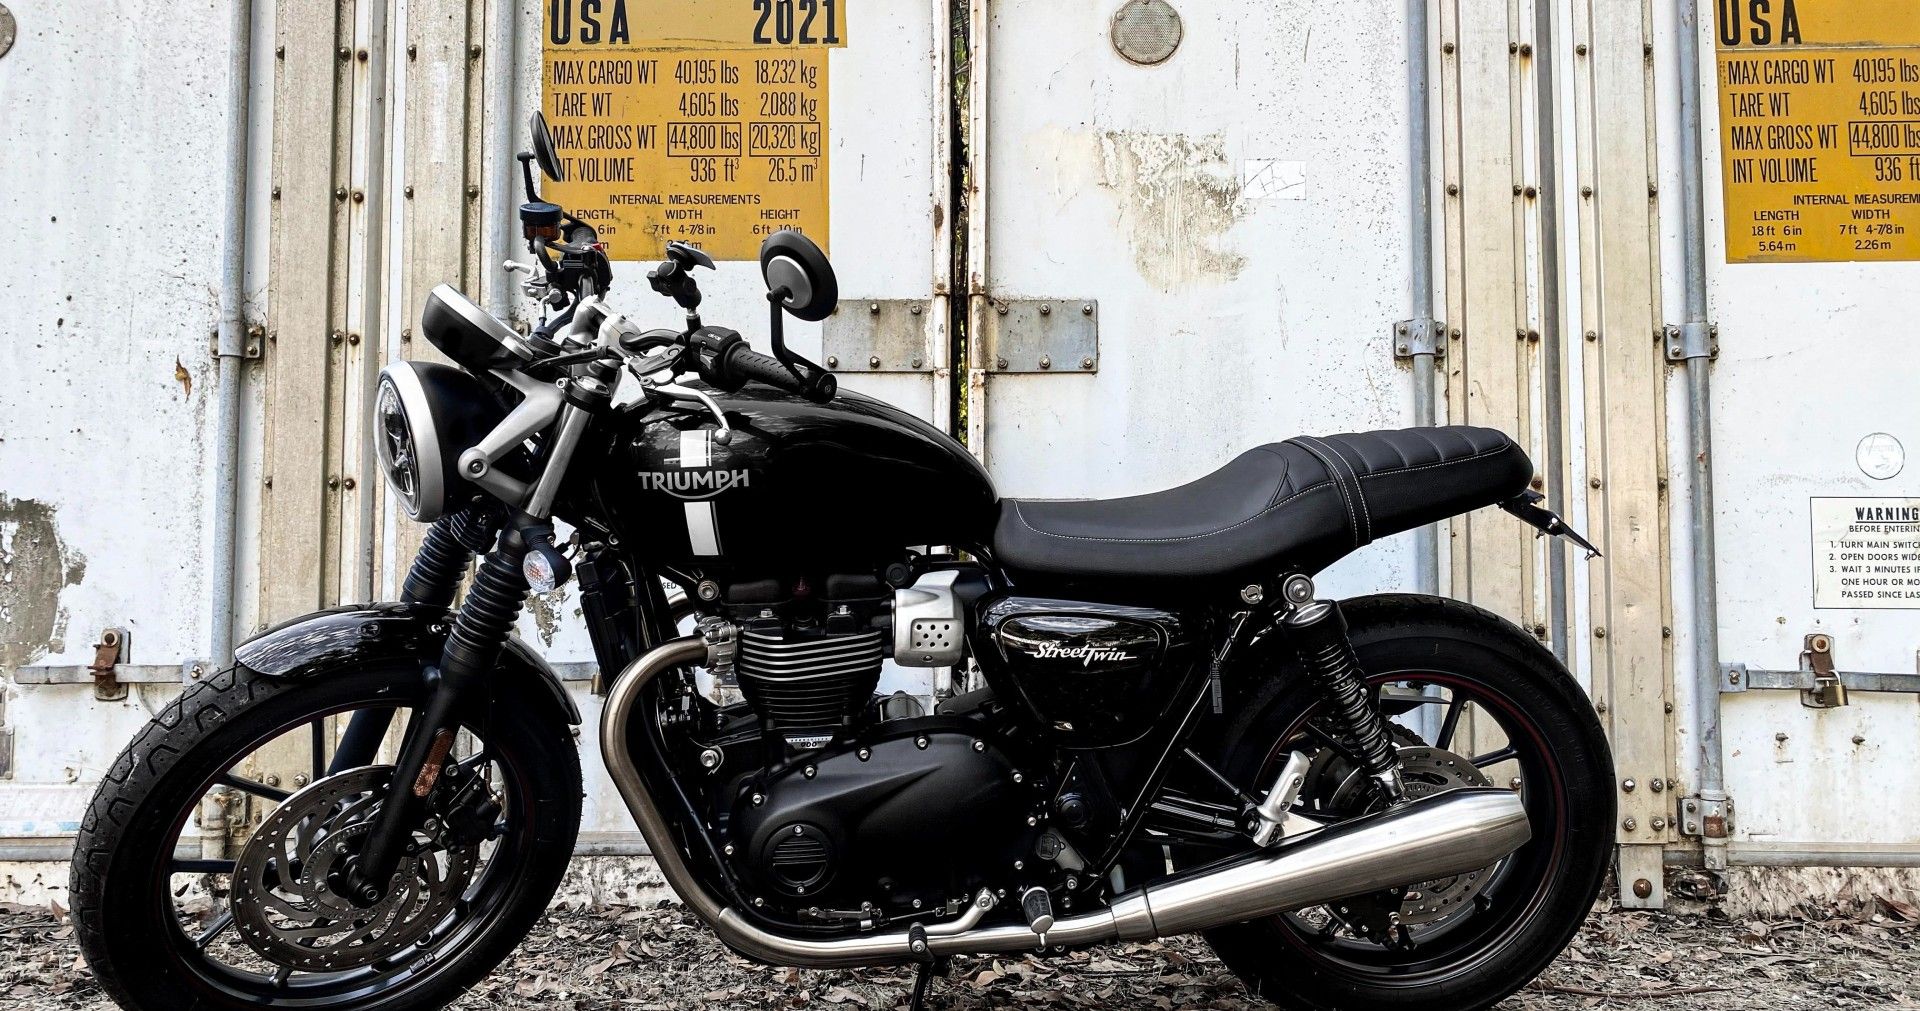 Here's Everything We Know About the 2021 Triumph Street Twin